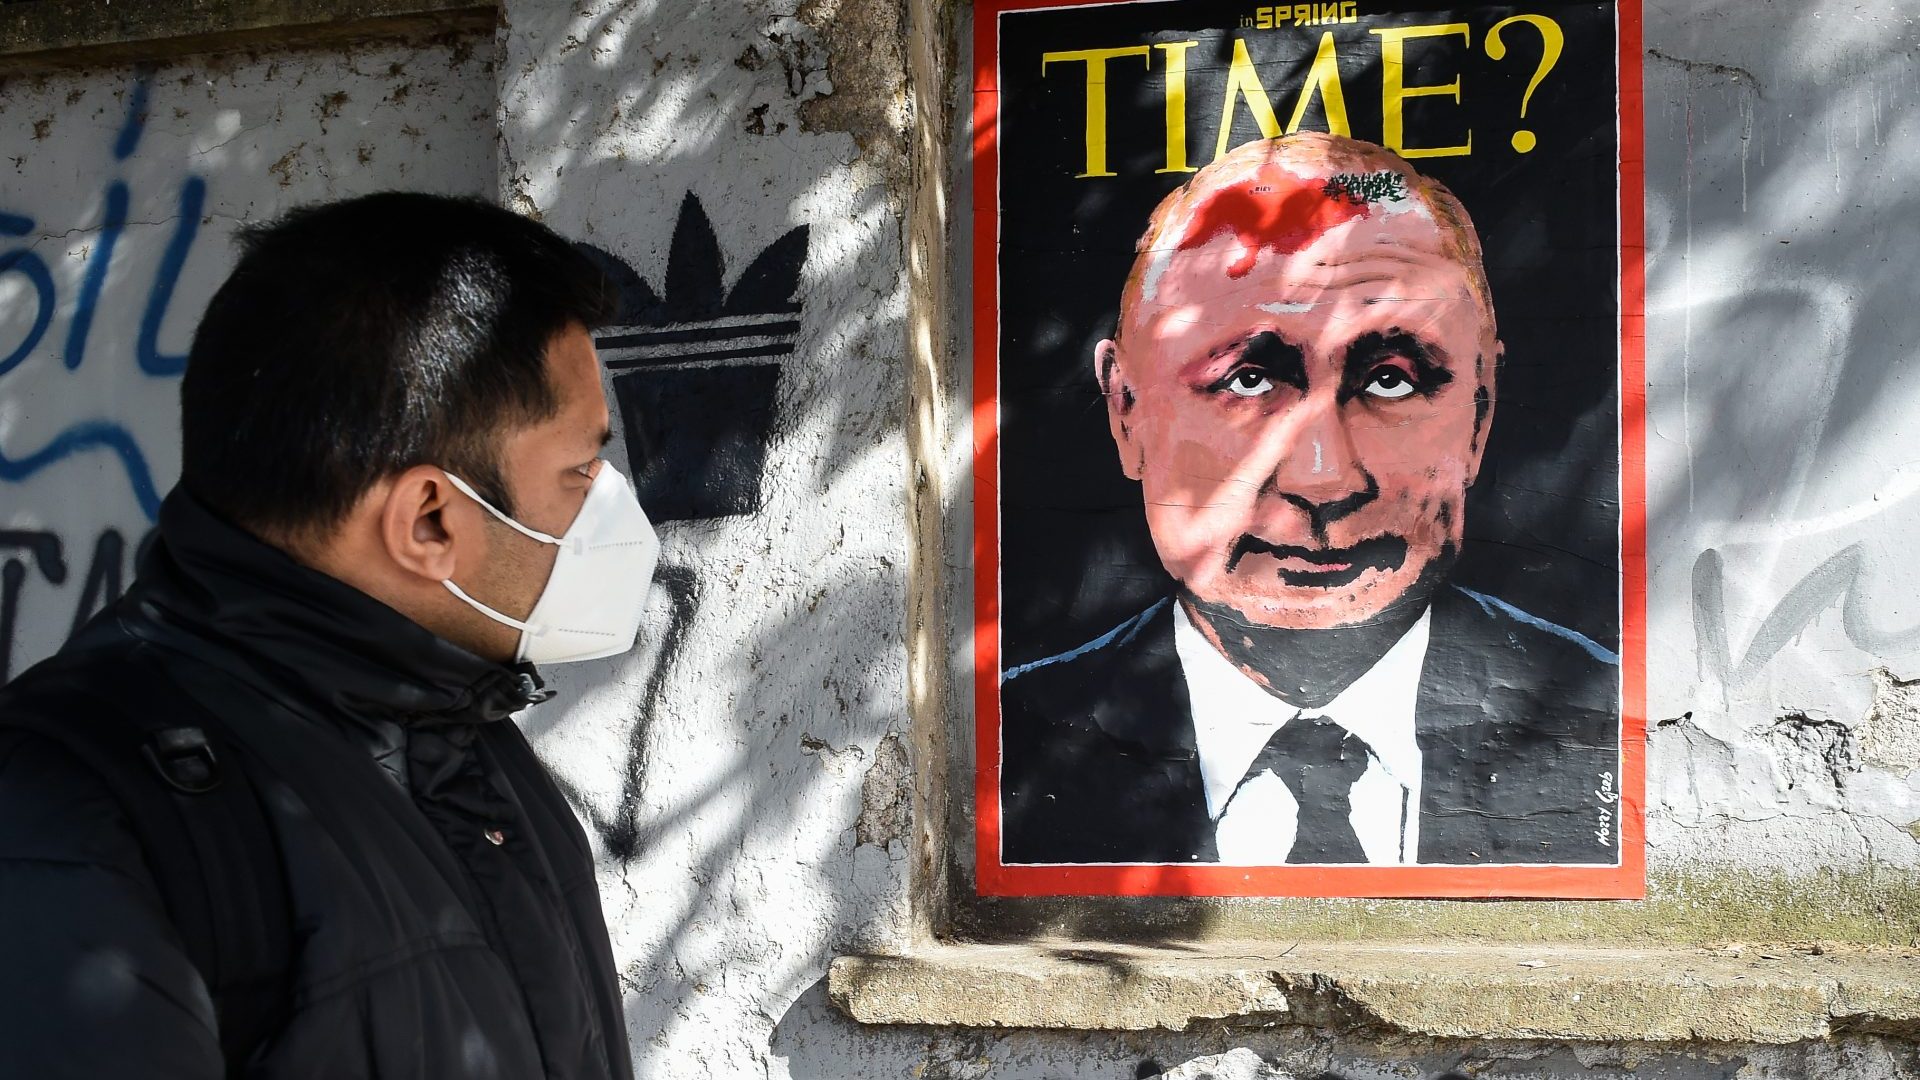 A mural in Rome by street artist Harry Greb depicts a hypothetical Time magazine cover featuring Vladimir Putin with a birthmark in the shape of Ukraine. Photo: Marilla Sicilia/ Mondadori Portfolio/Getty